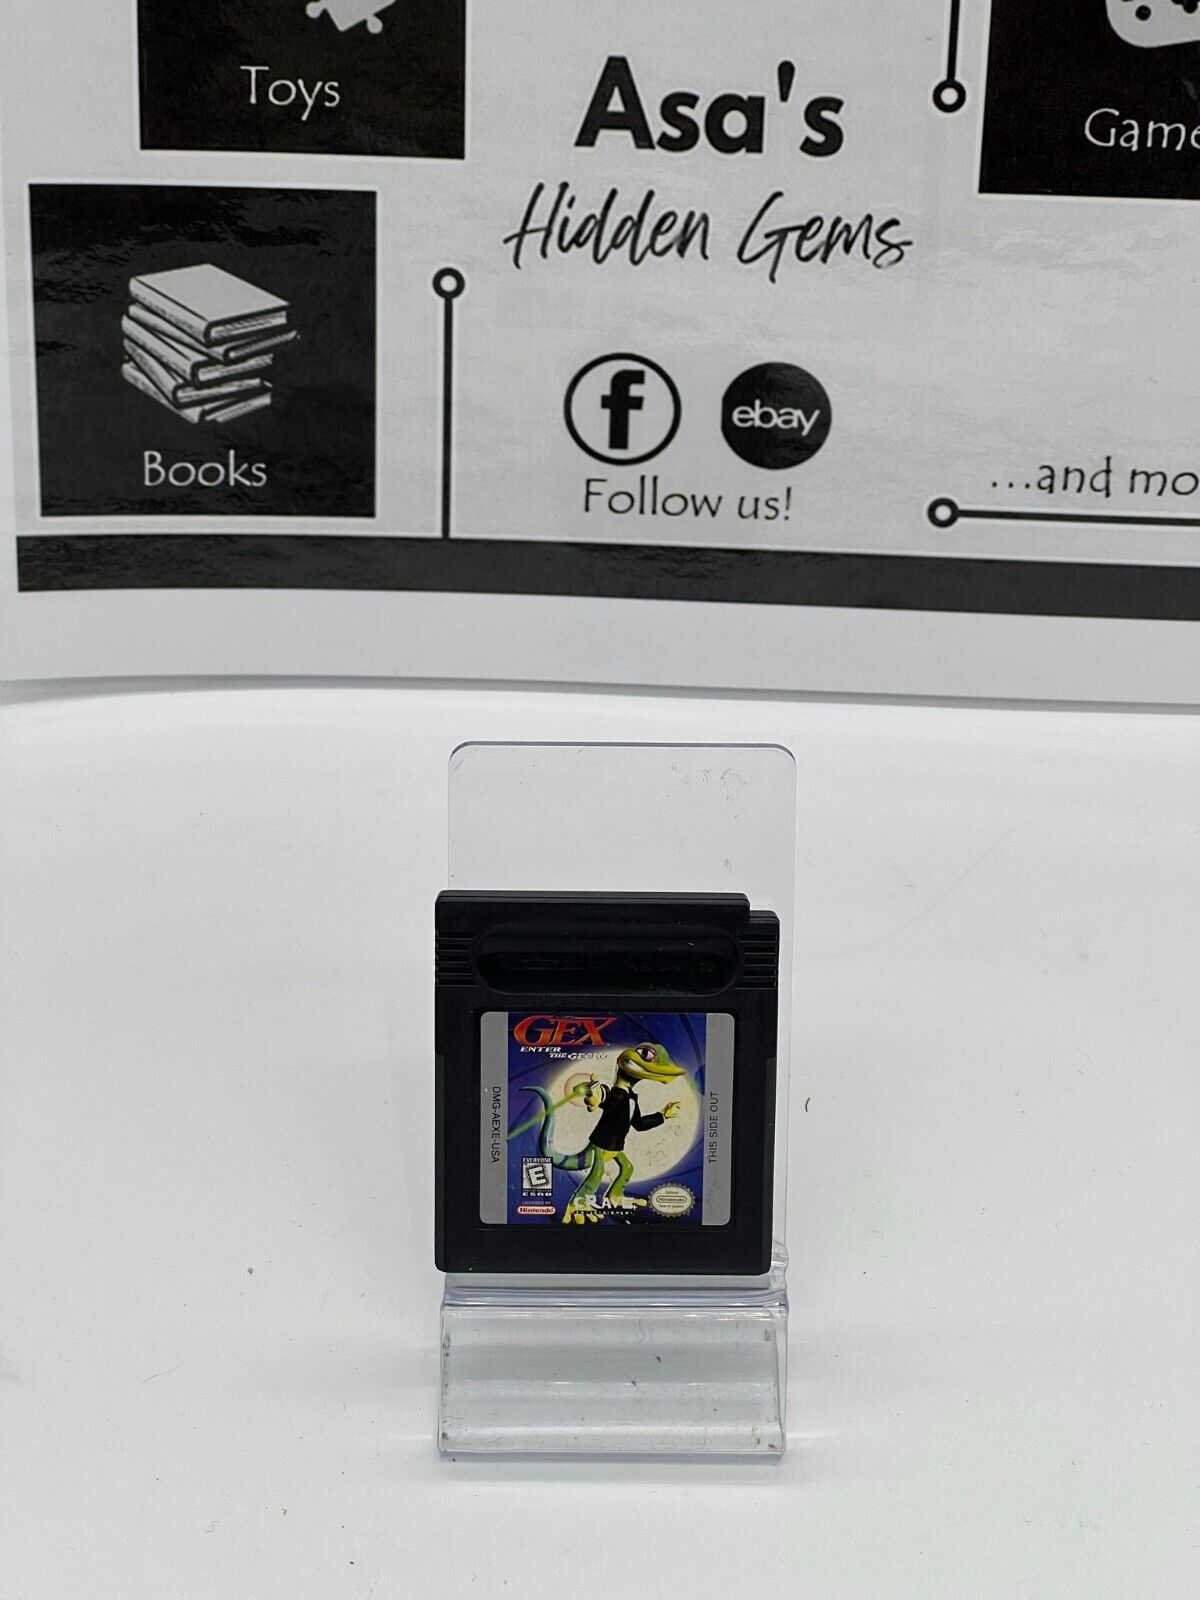 Gex: Enter the Gecko (Nintendo Game Boy Color, 1998) GBC Cart Only - Tested